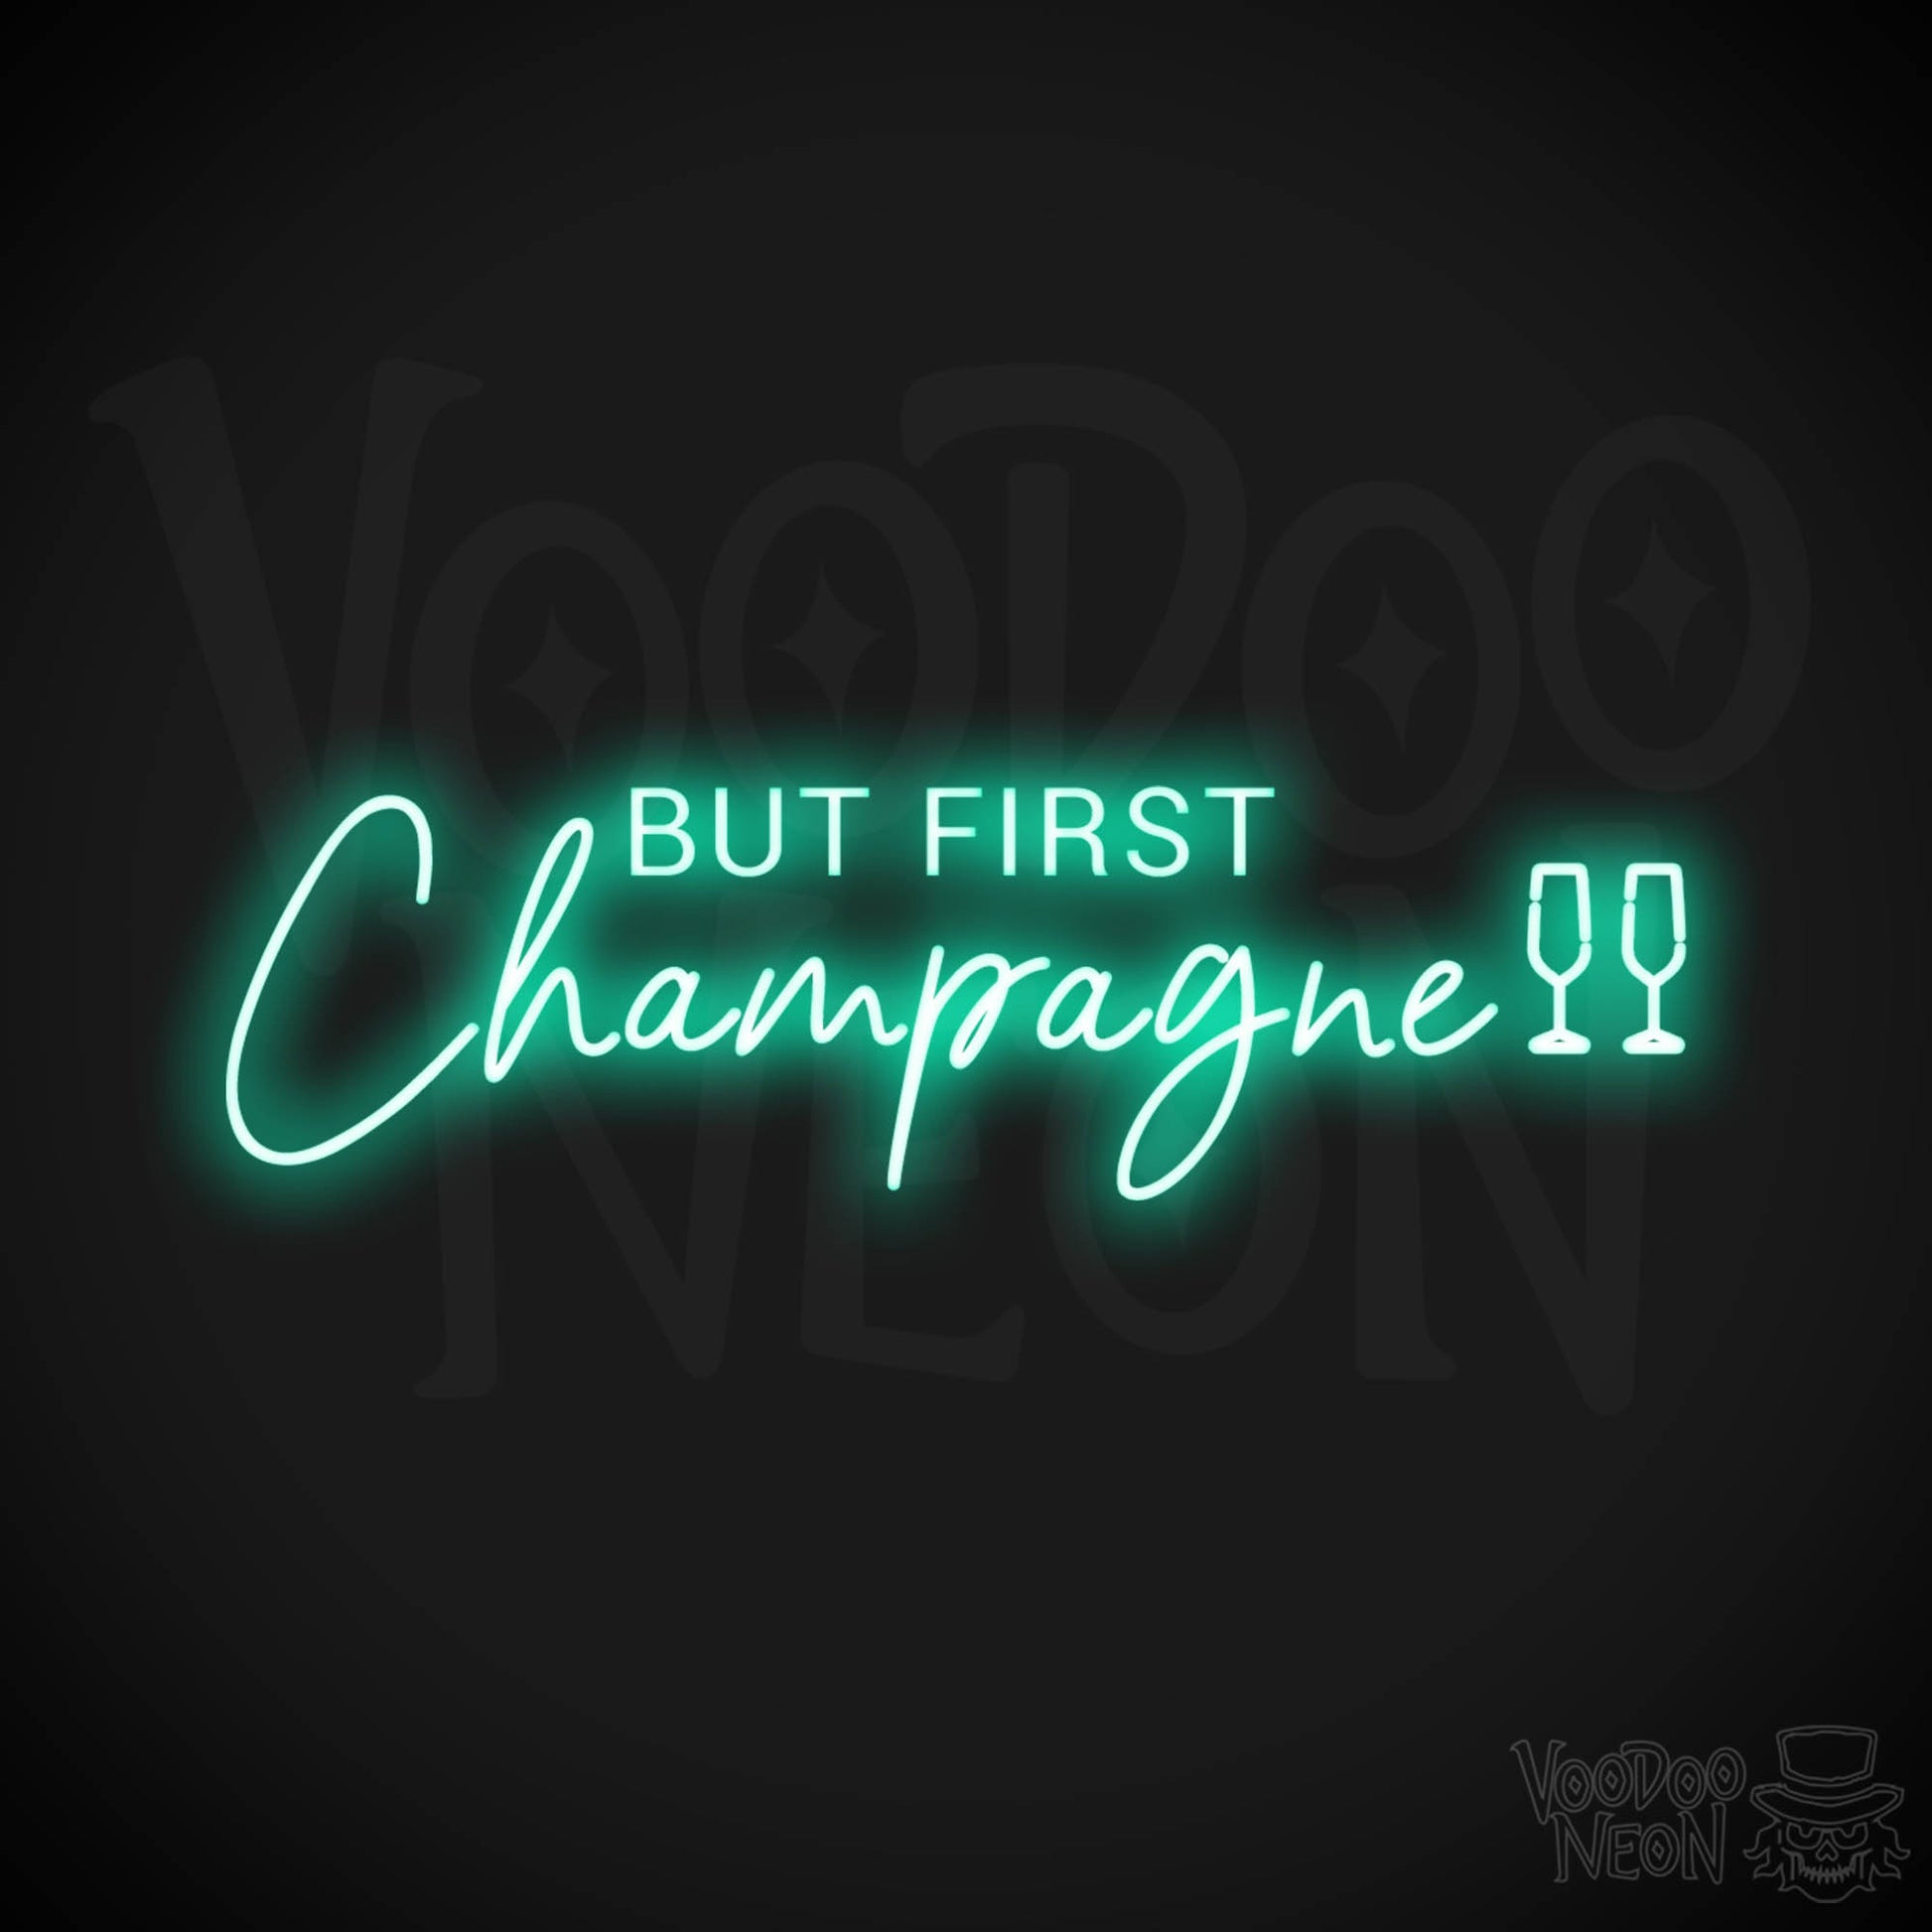 But First Champagne Neon Sign - Neon But First Champagne Sign - Neon Wall Art - Color Light Green